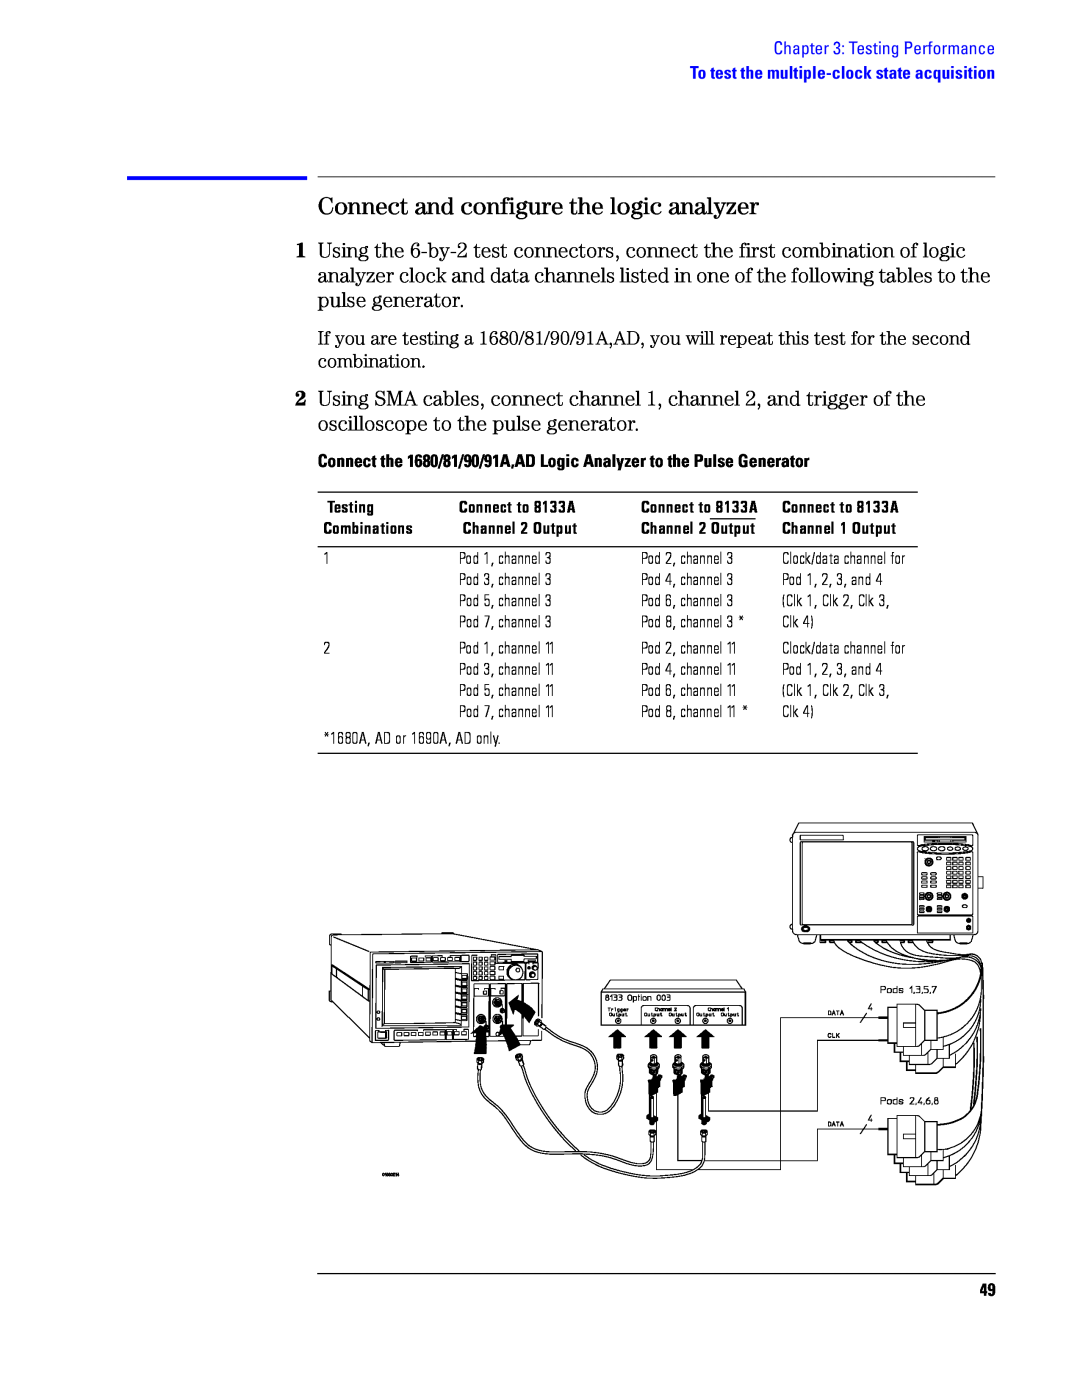 Agilent Technologies manual Connect and configure the logic analyzer, 1680A, AD or 1690A, AD only, Connect to 8133A 